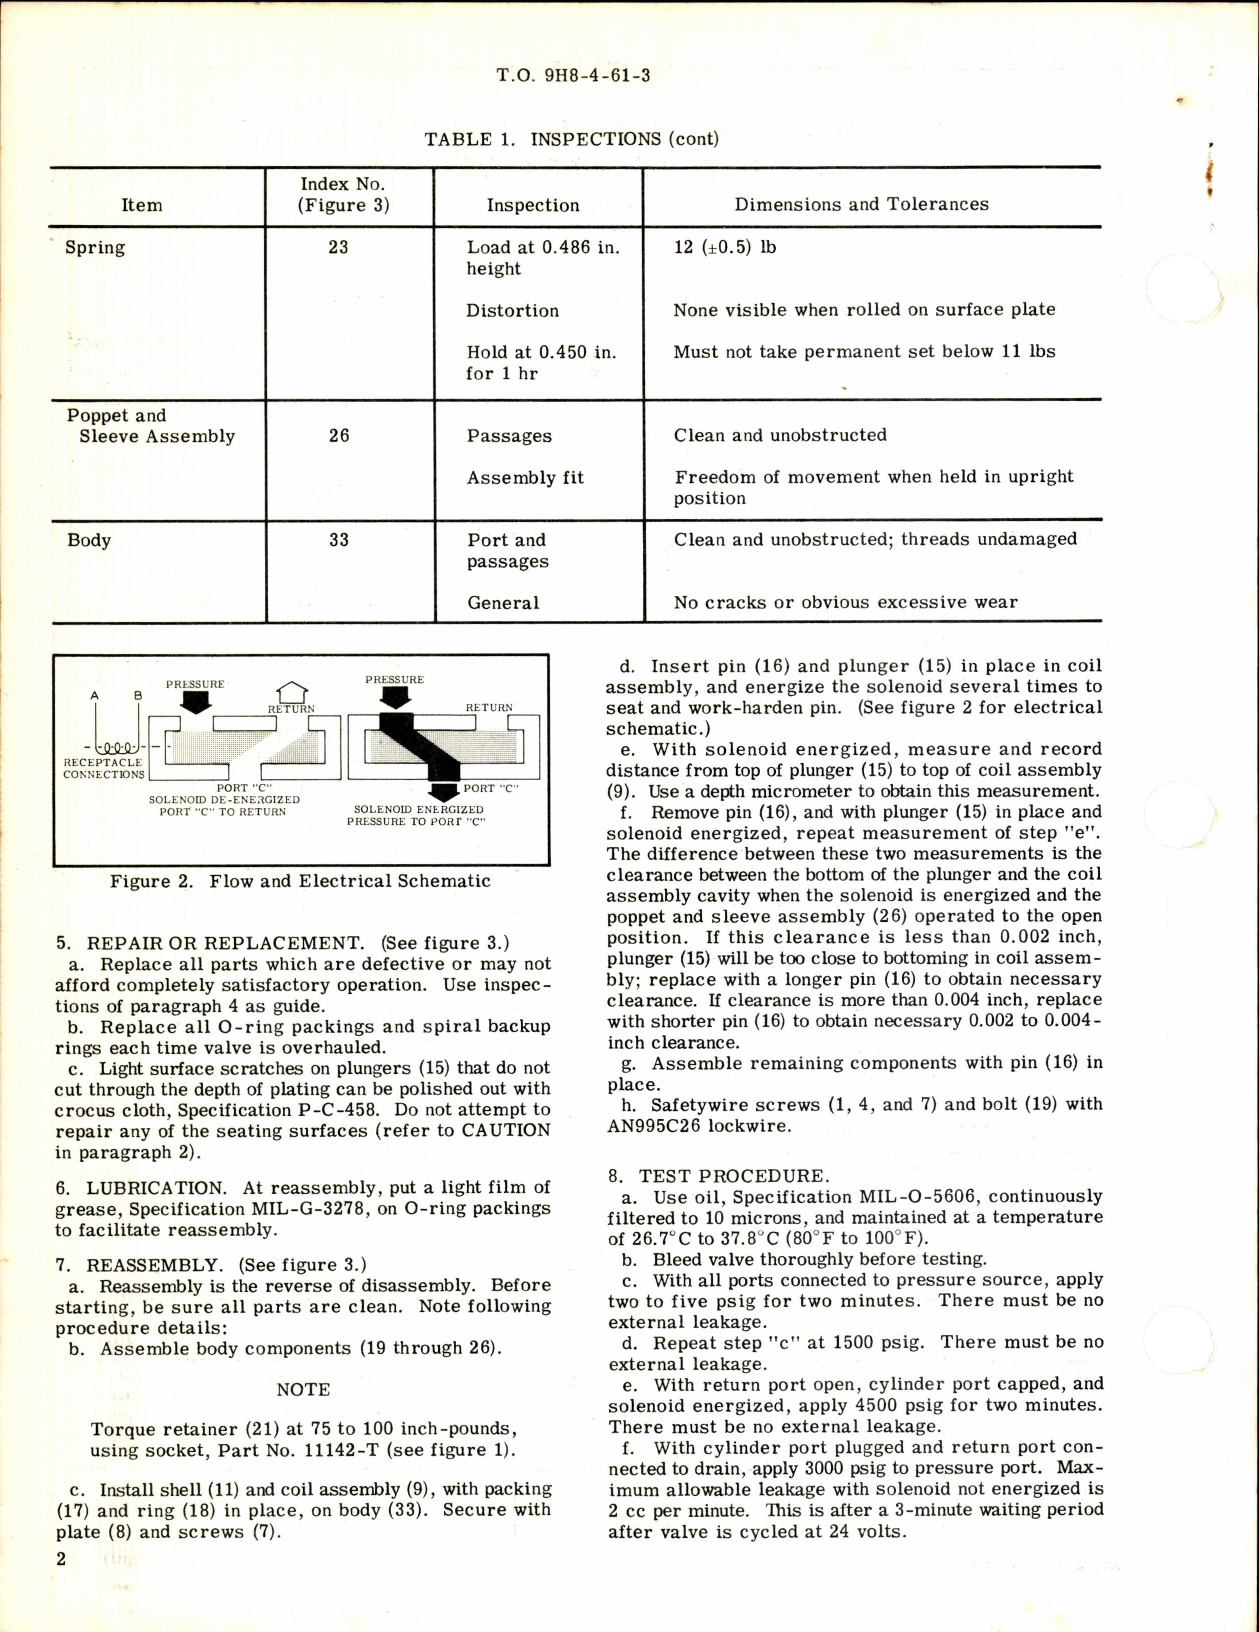 Sample page 2 from AirCorps Library document: Parts Breakdown for Hydraulic Shutoff Valve Part No 12660